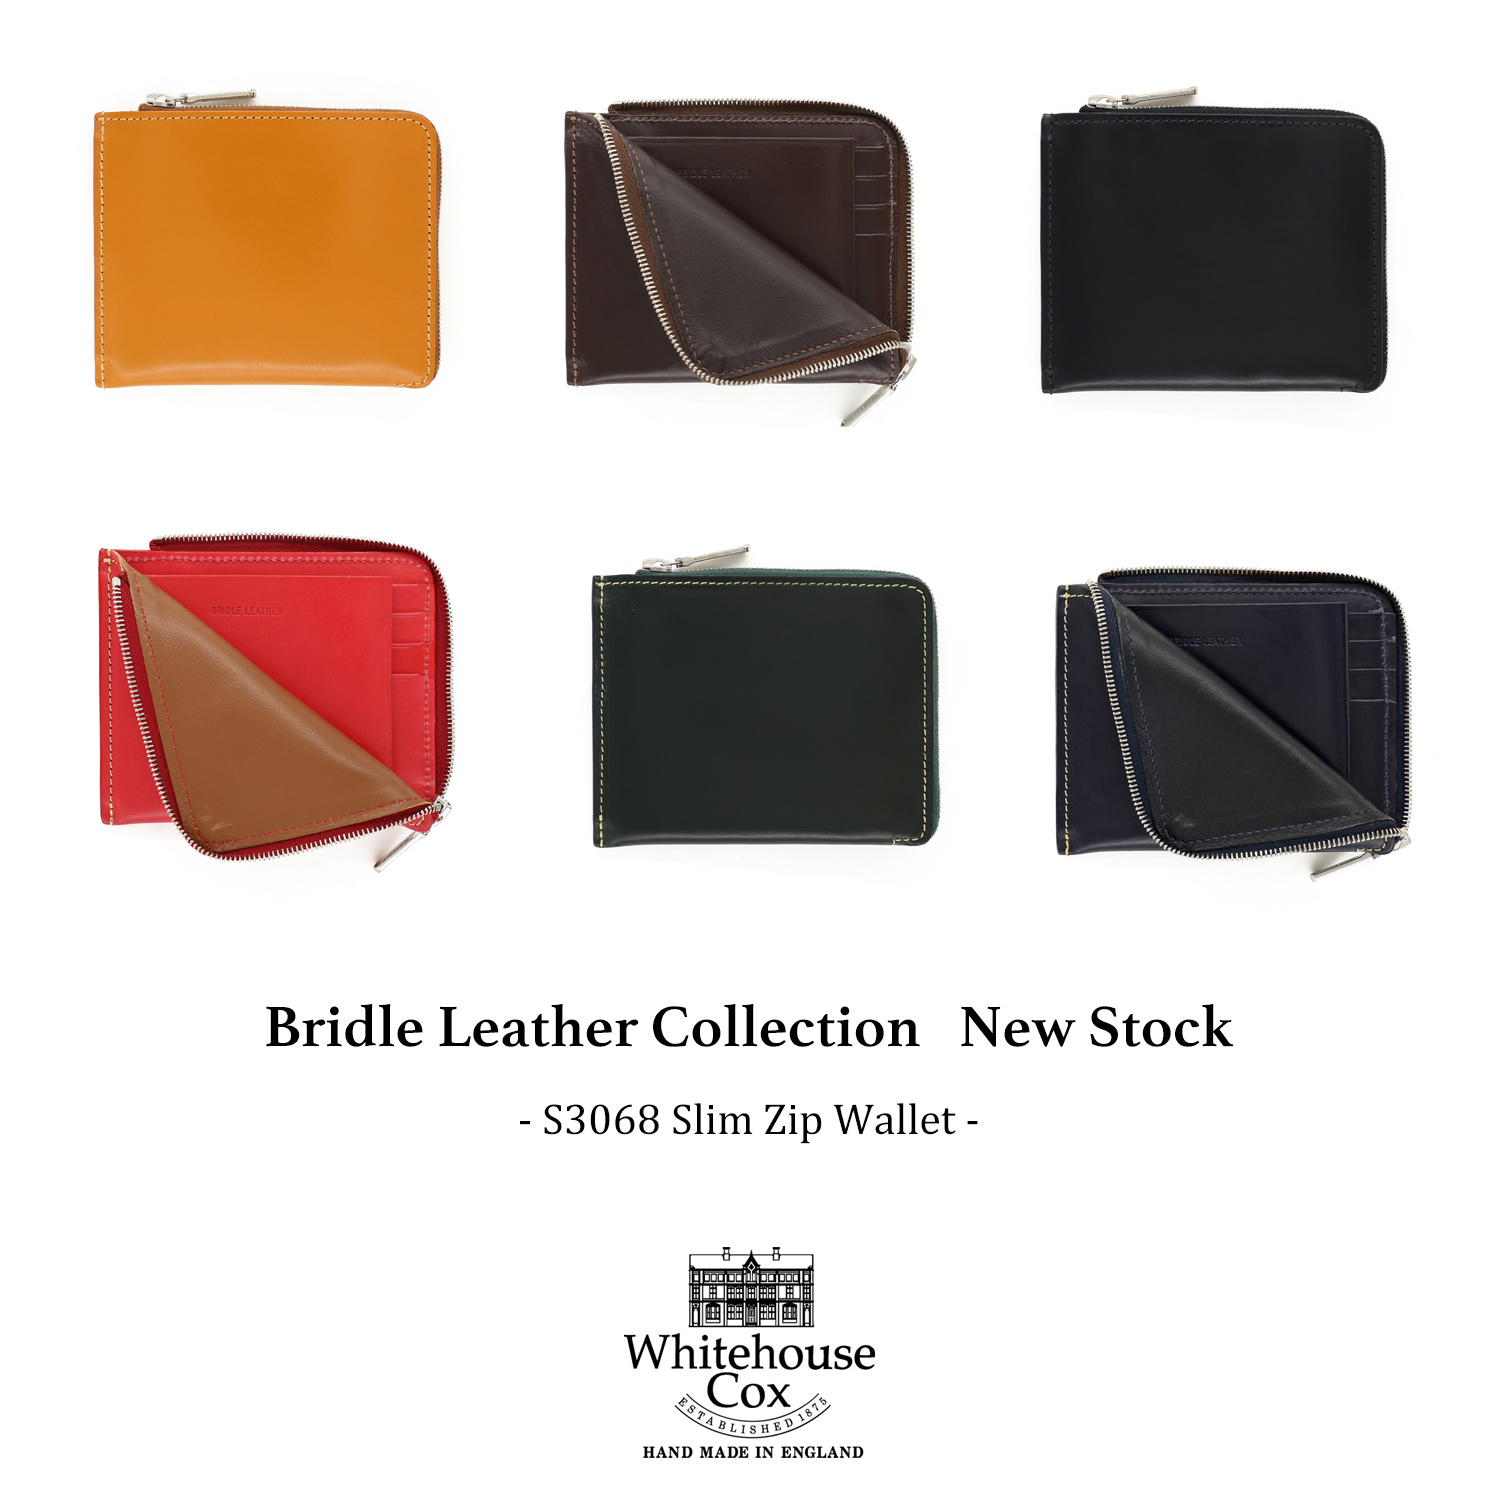 Whitehouse Cox – BRIDLE LEATHER COLLECTION – New Stock